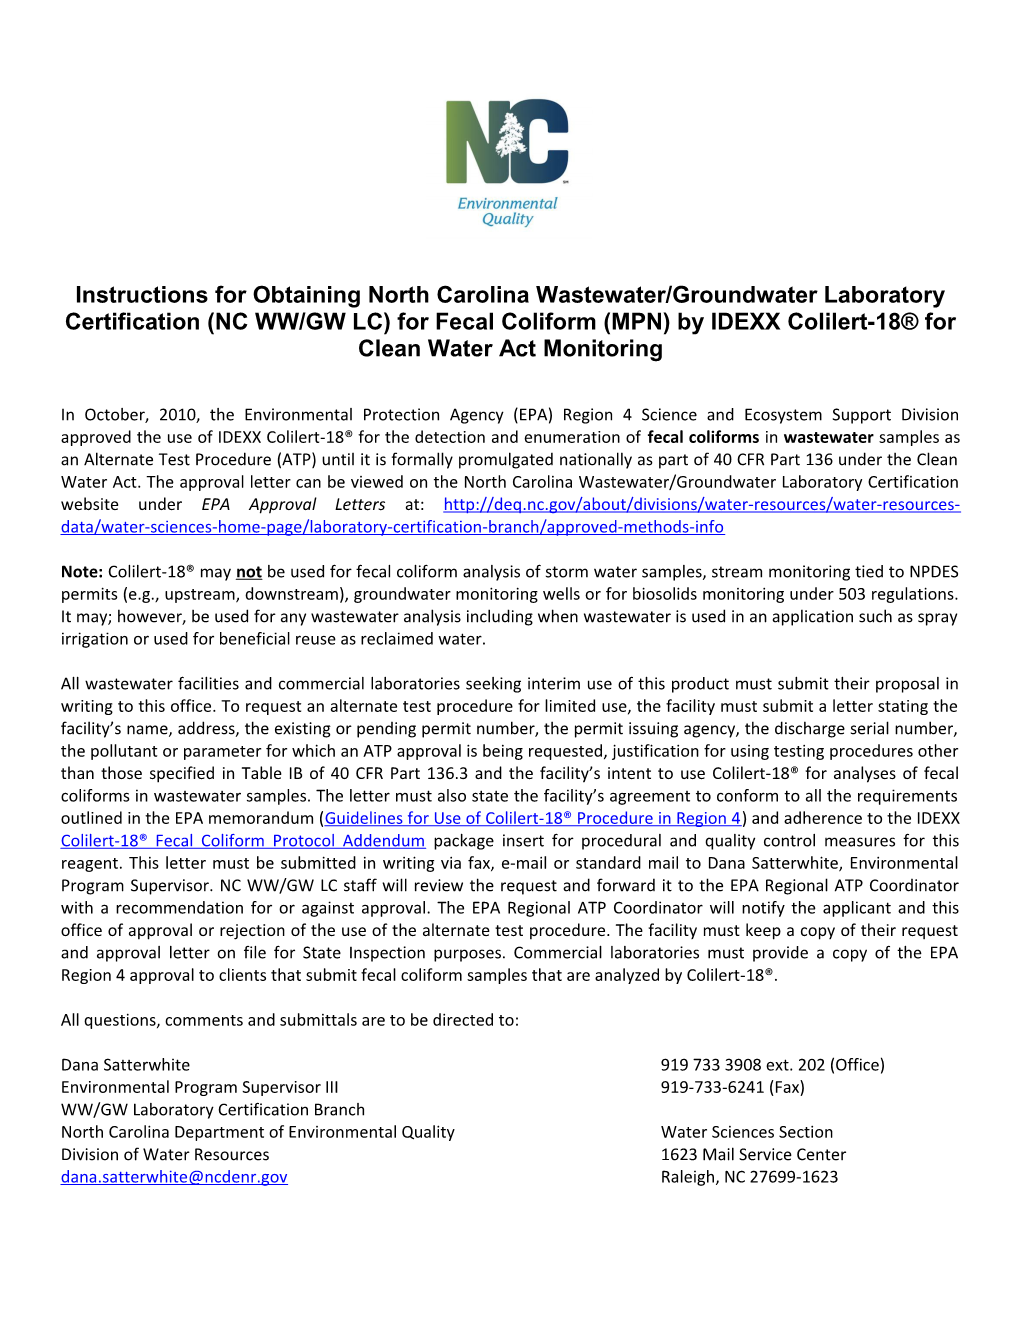 Instructions for Obtaining North Carolina Wastewater/Groundwater Laboratory Certification